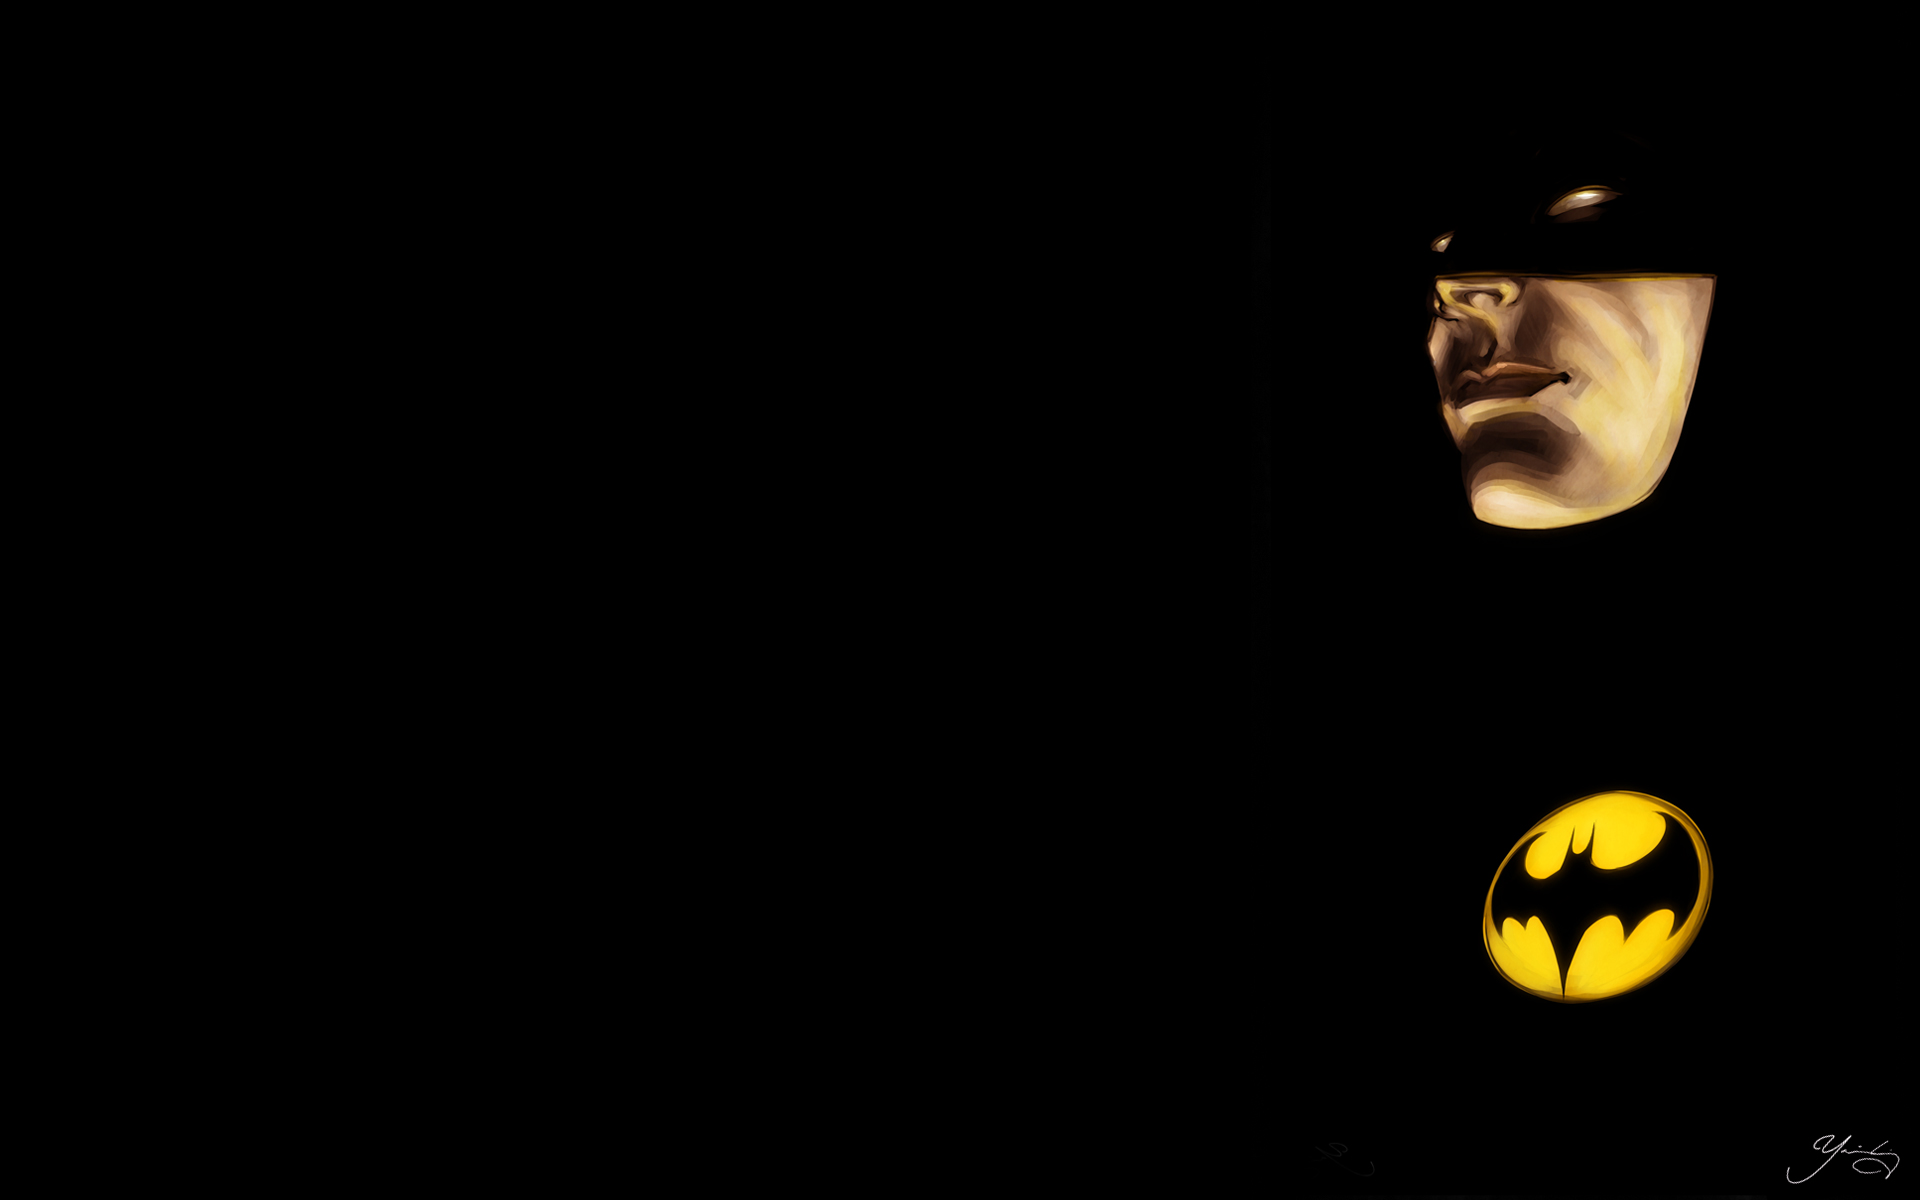 Batman Logo Wallpaper With You We Liked The Having Both